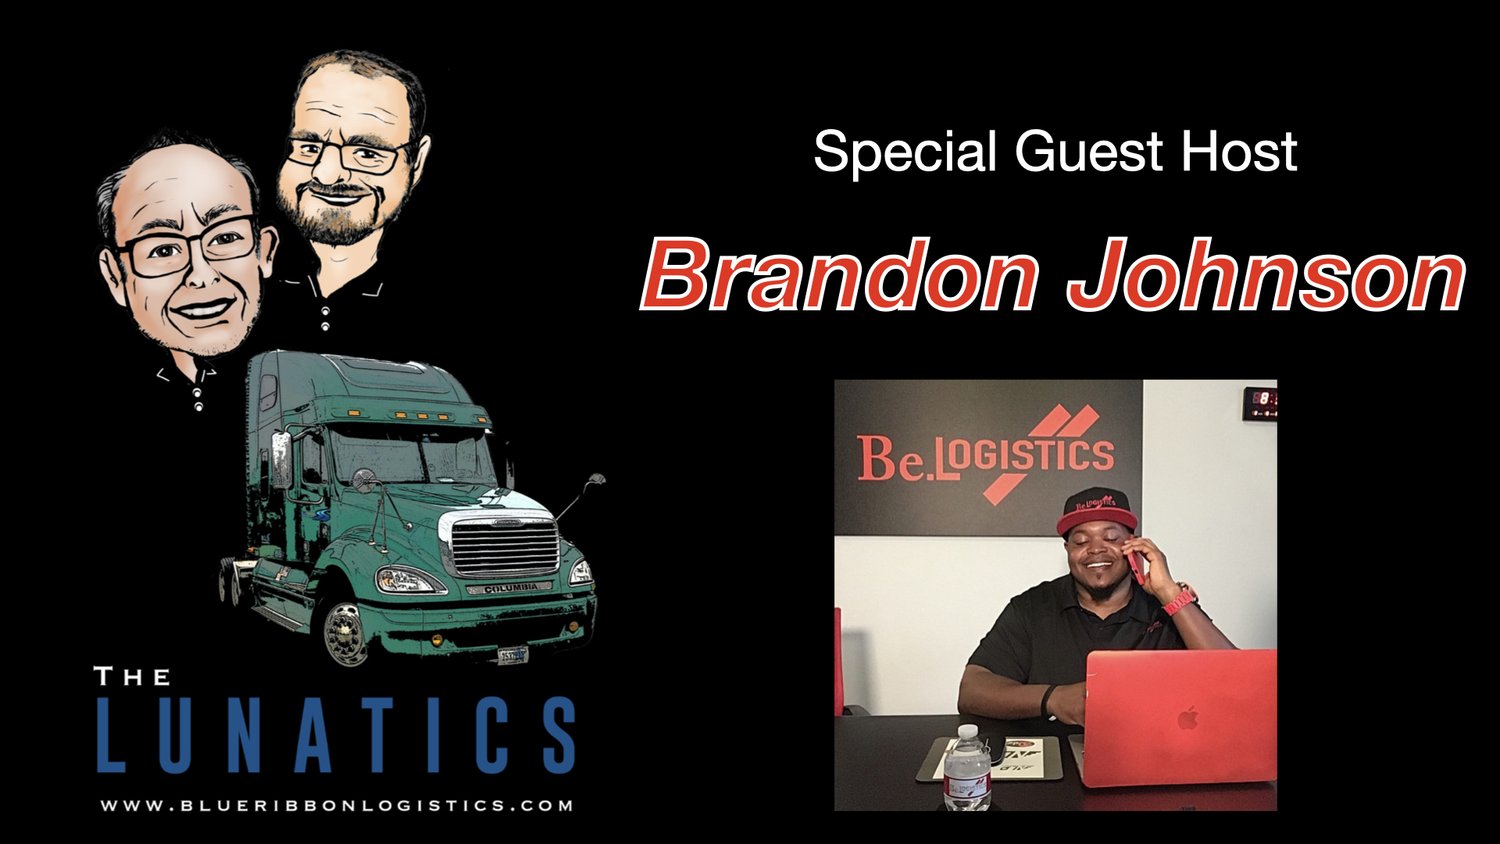 Episode 183: Special Guest Host Brandon Johnson from Be.Logistics